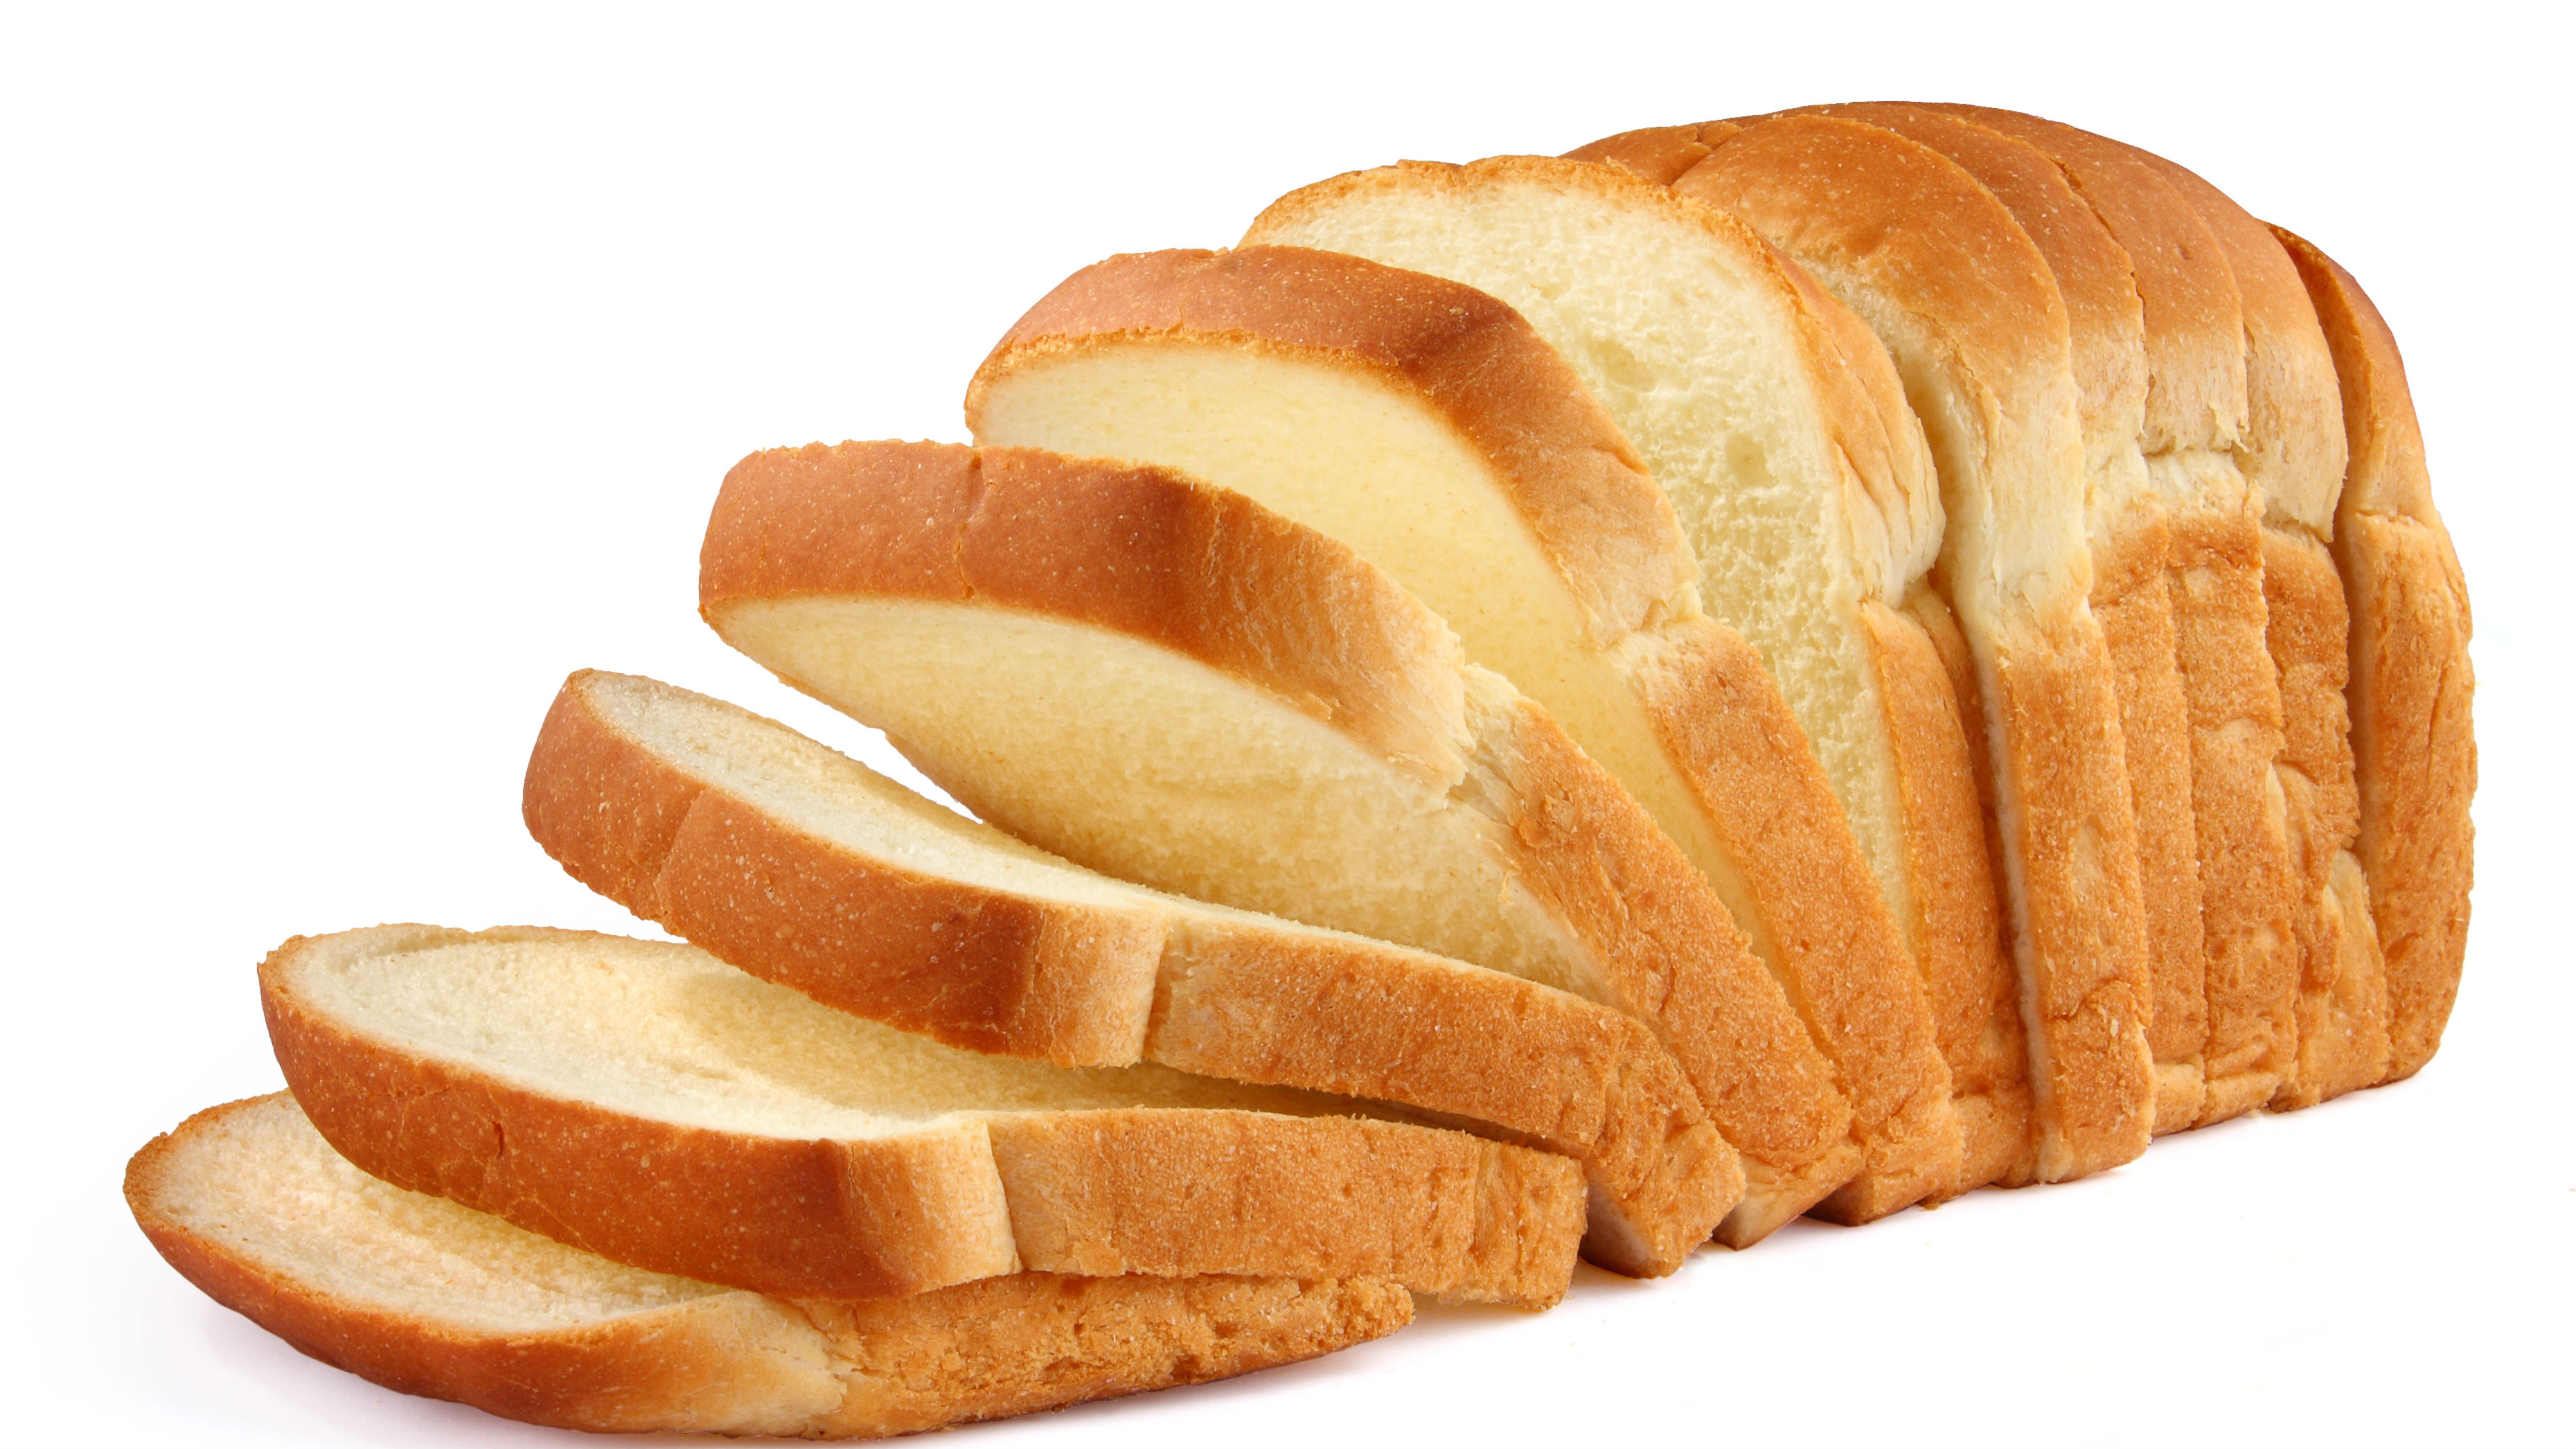 Man in Bushenyi Kills Son for Eating Bread without Permission